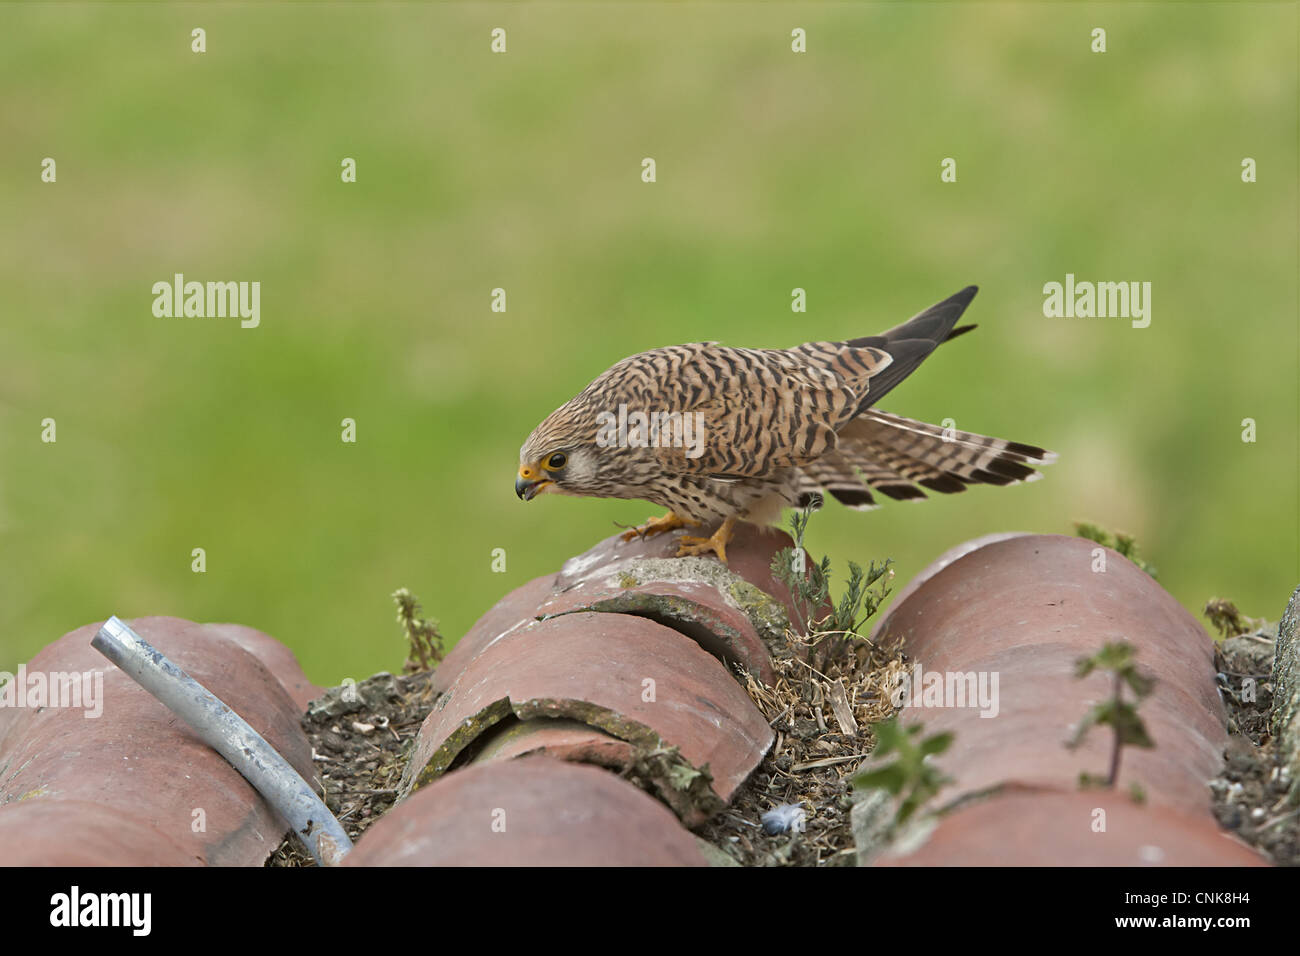 Lesser Kestrel (Falco naumanni) adult female, displaying ready for mating, standing on roof tiles, Extramadura, Spain, april Stock Photo